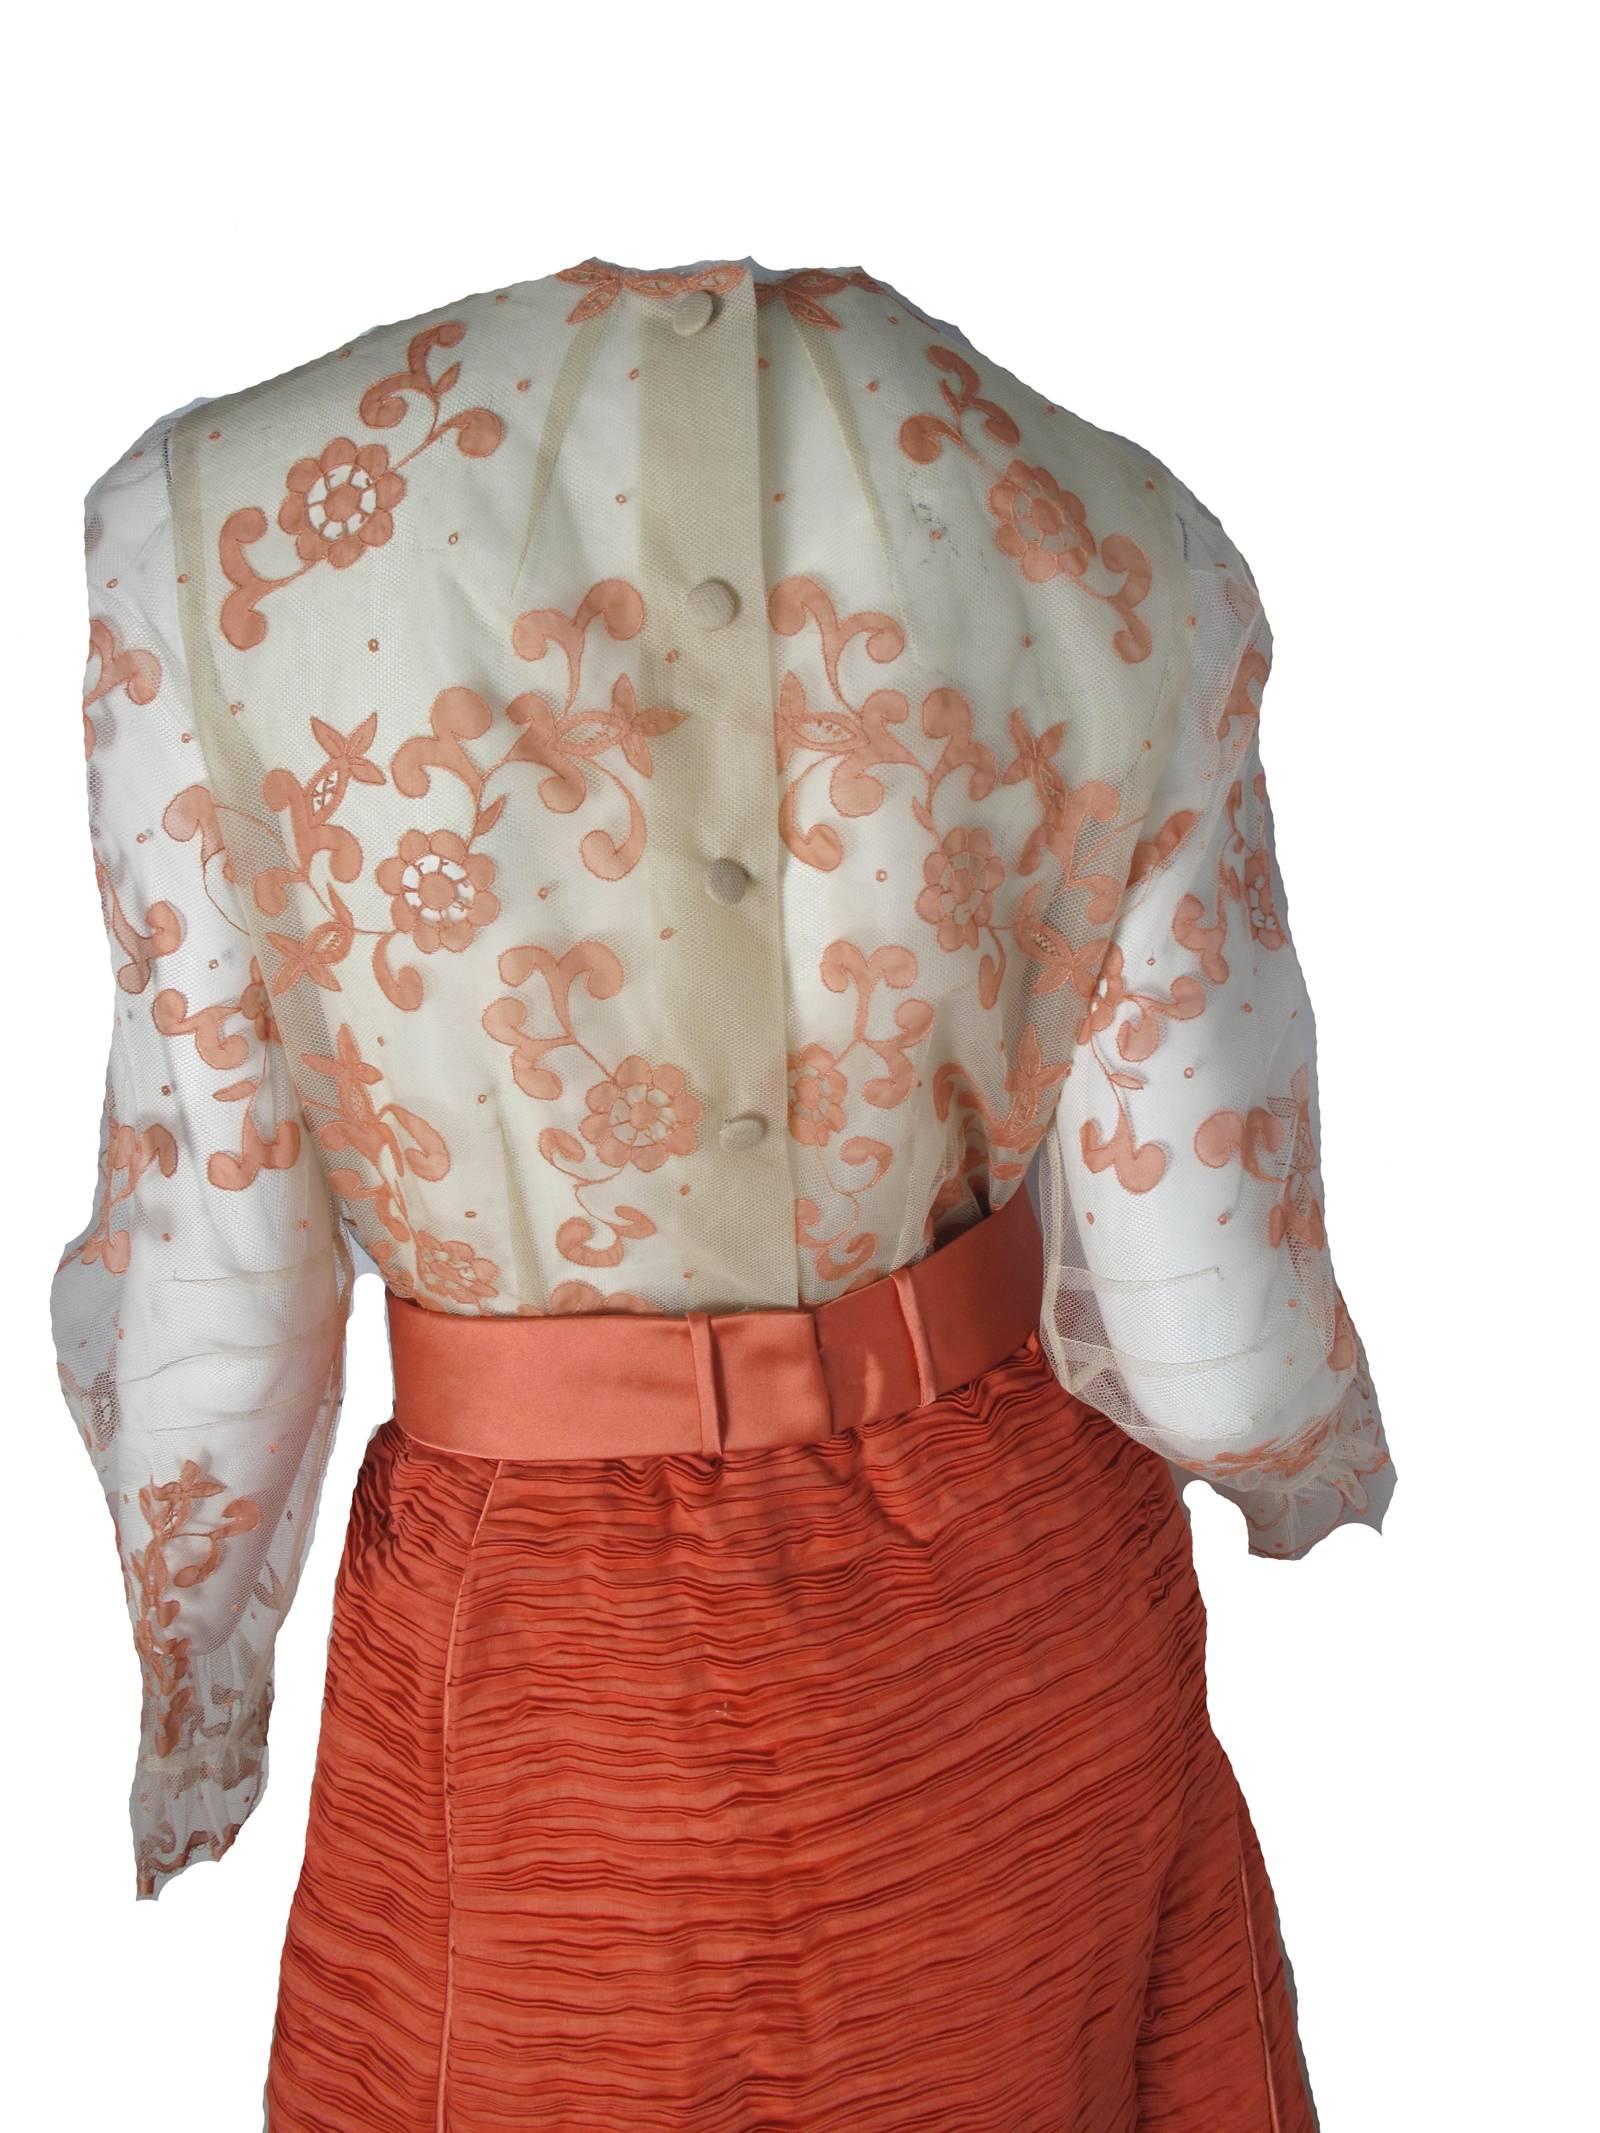 Sybil Connolly Lace Blouse and Pleated Irish Linen Skirt, 1960s Couture In Excellent Condition In Austin, TX